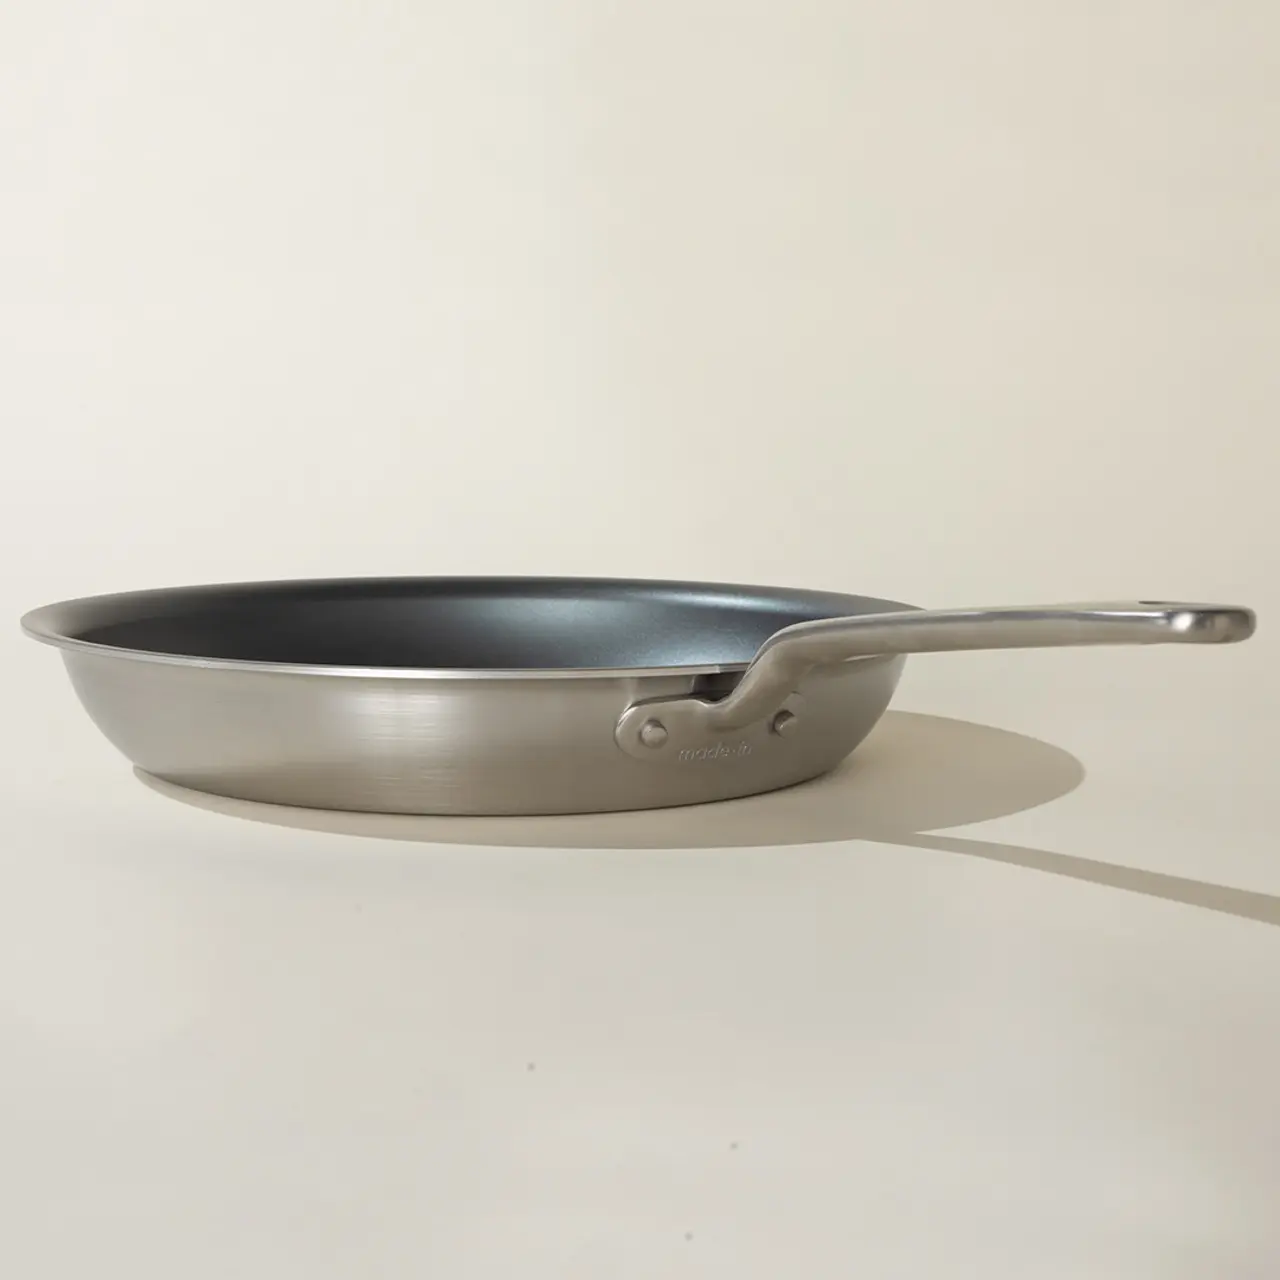 A silver frying pan with a long handle is positioned on a light background, casting a soft shadow.